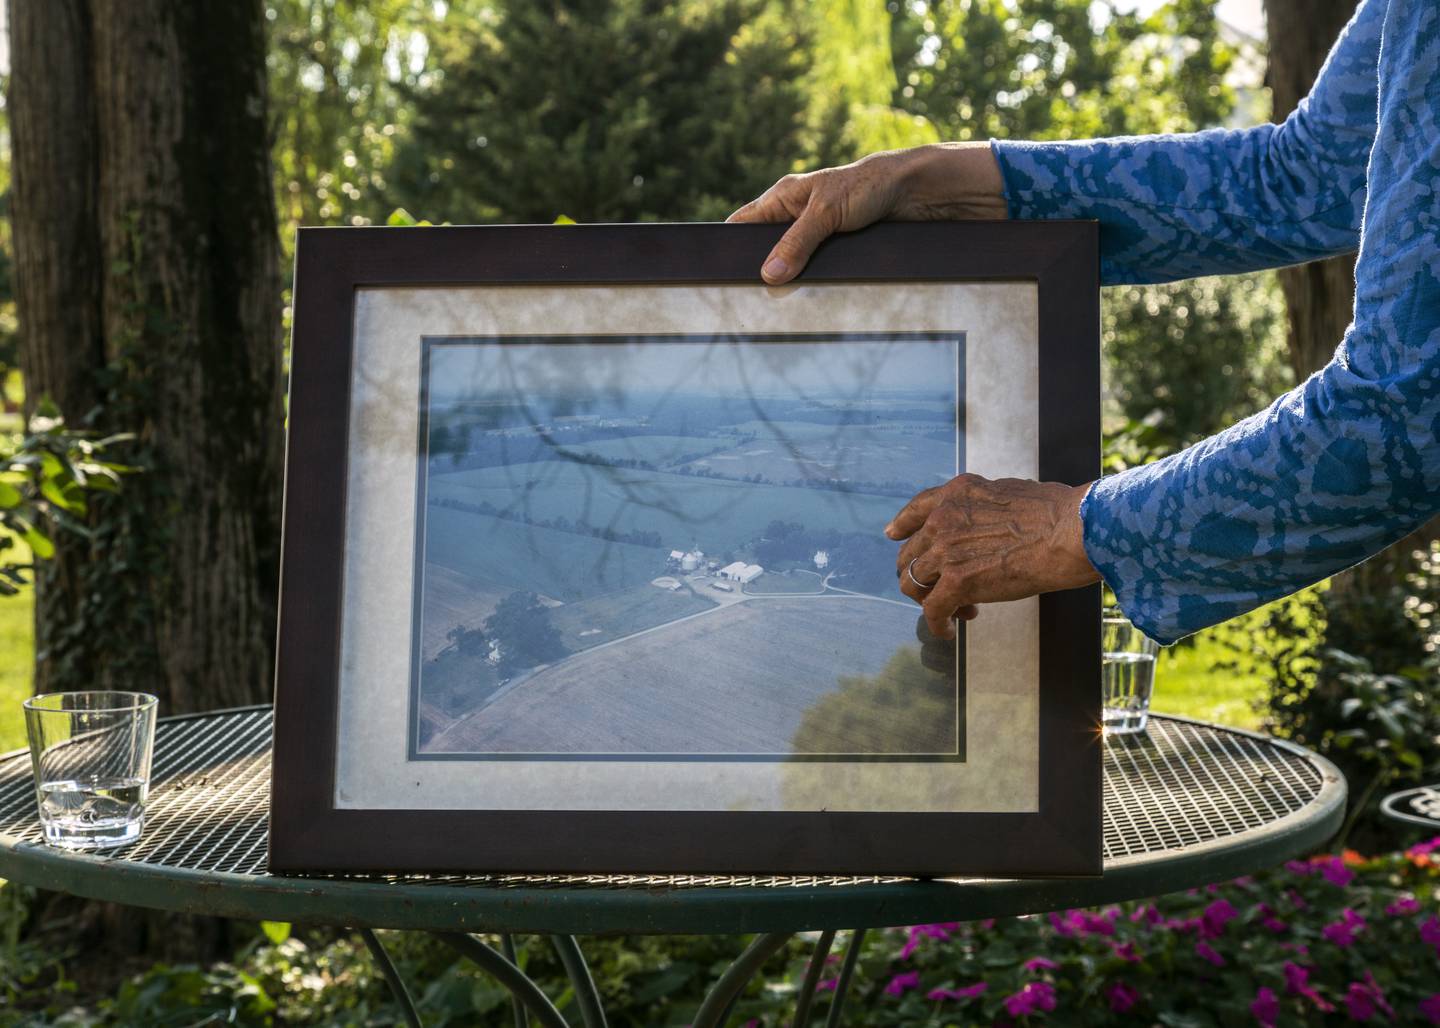 Anne Habberton displays a framed aerial photo that shows much of the Emory Farm taken in the early 2000's on August 3rd, 2022 in Queenstown Maryland